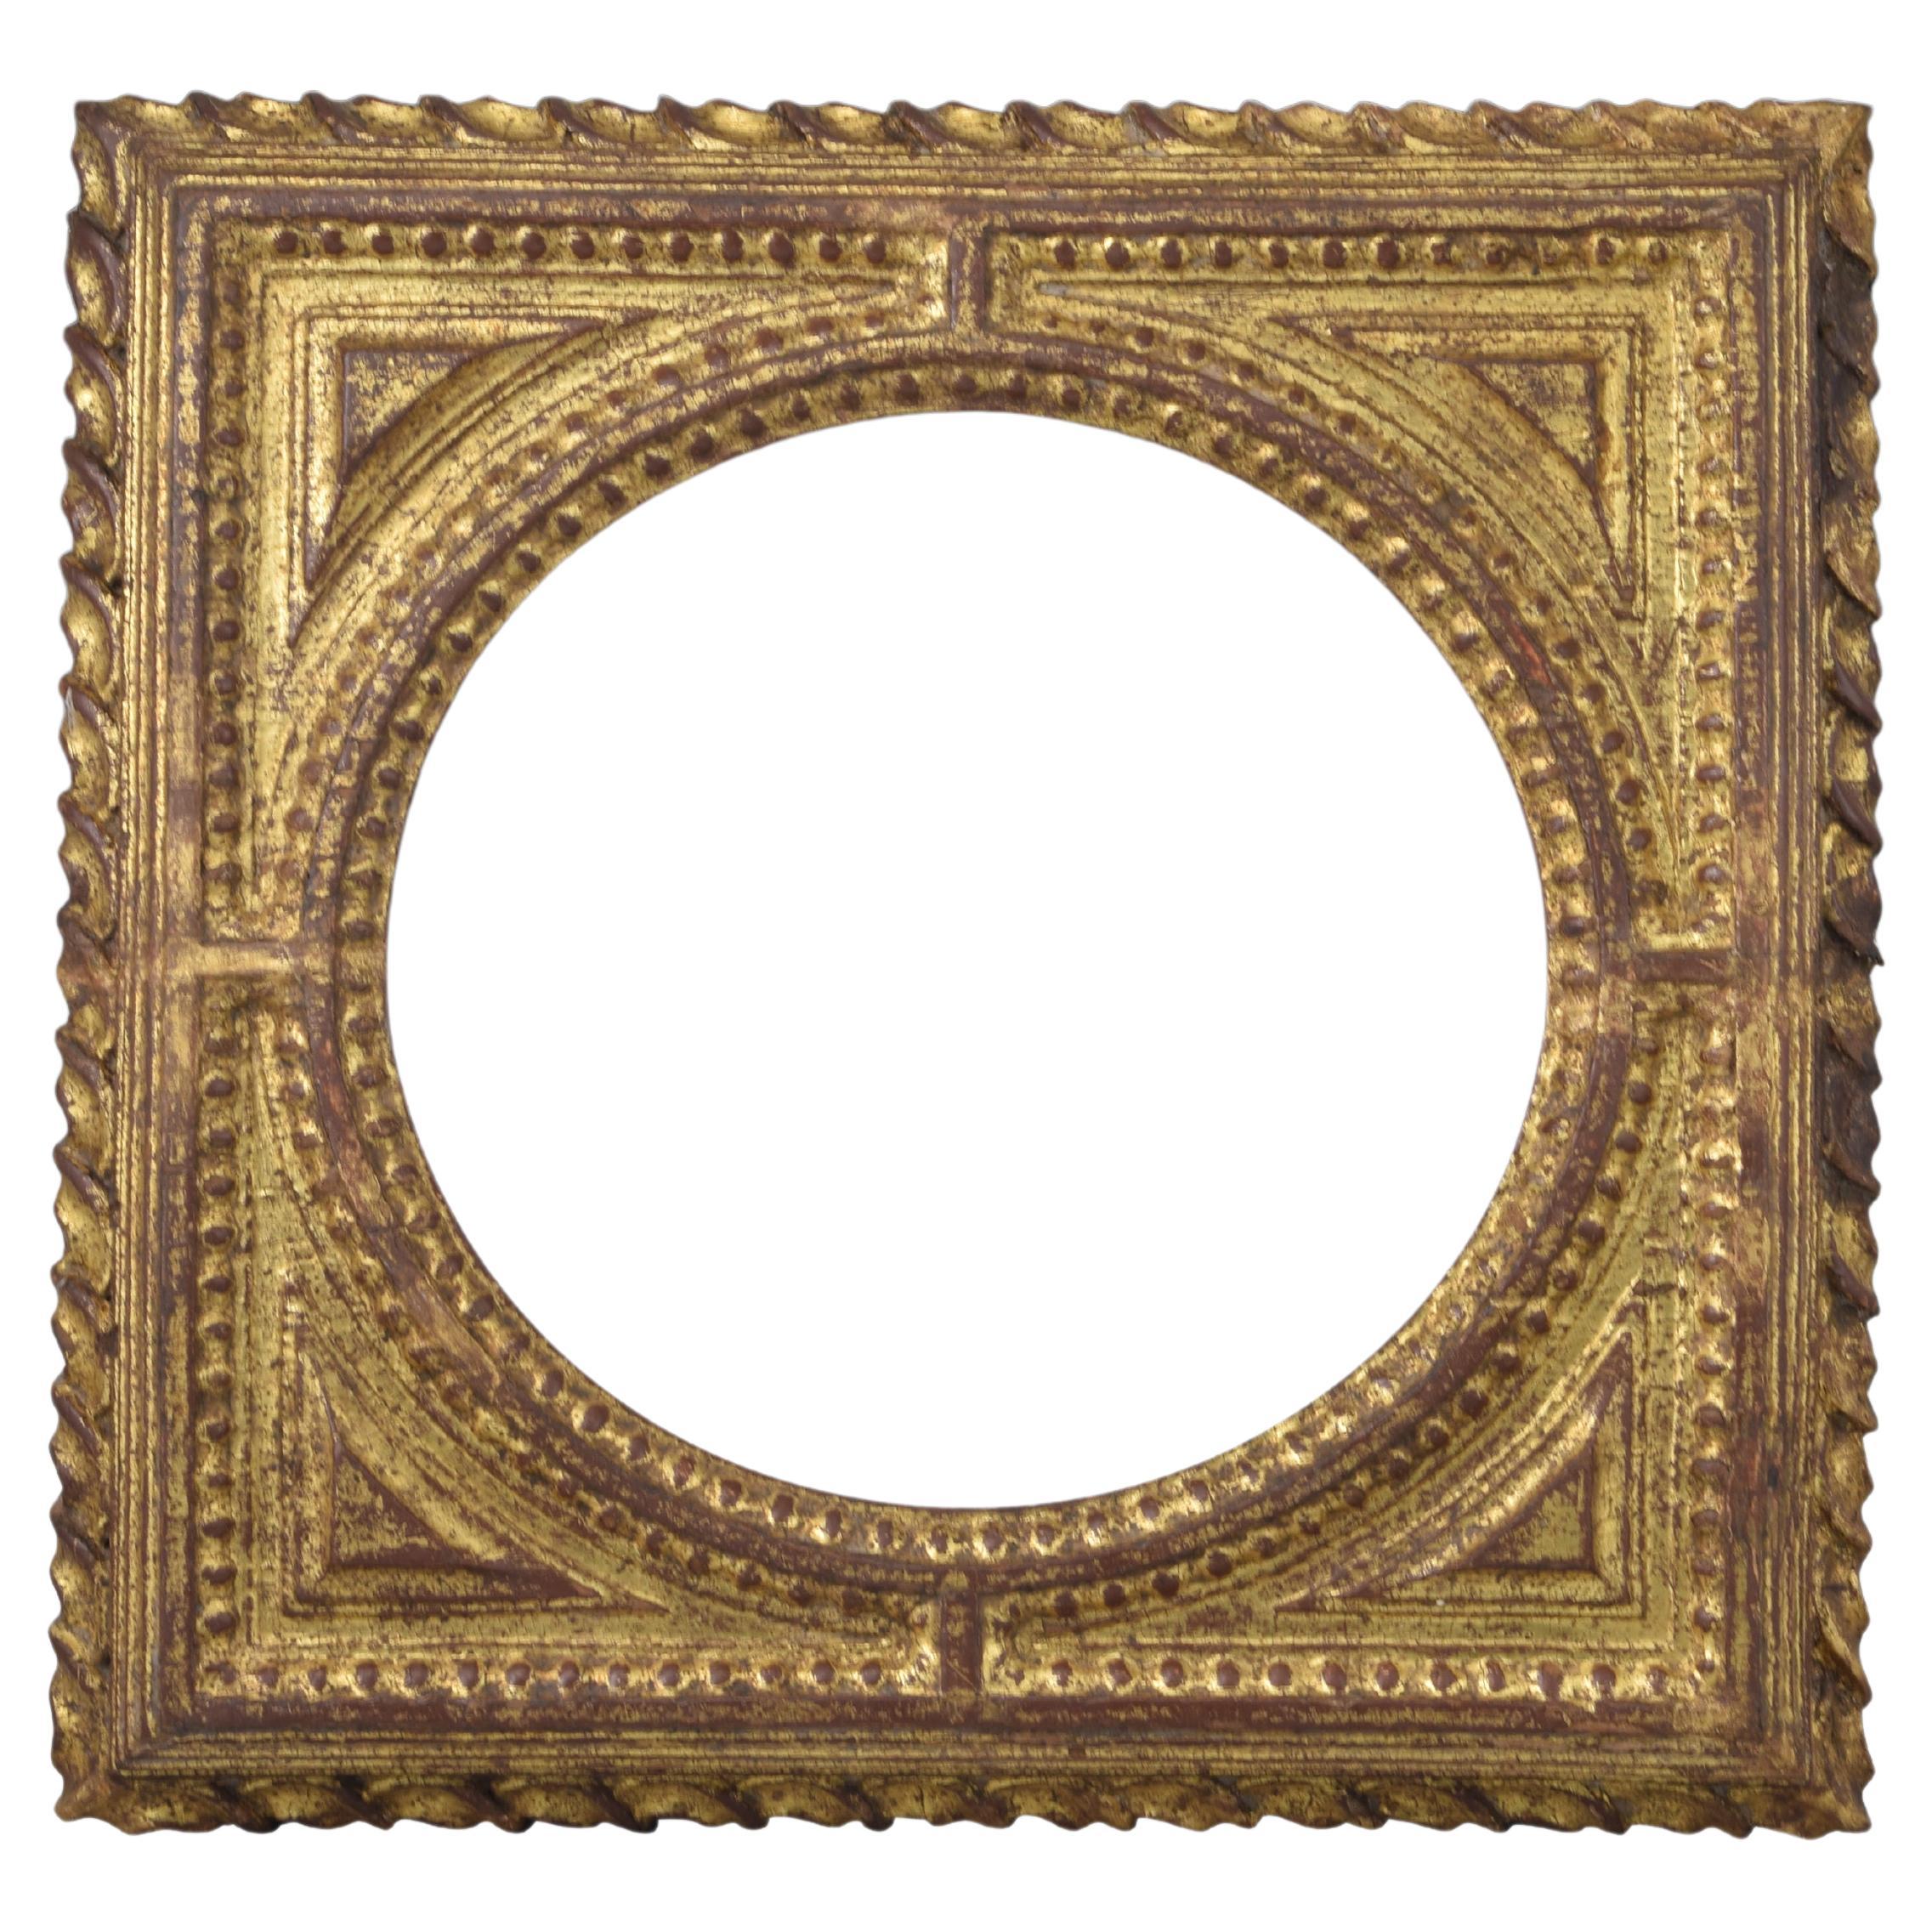 Frame. Carved and gilded wood. 17th century.